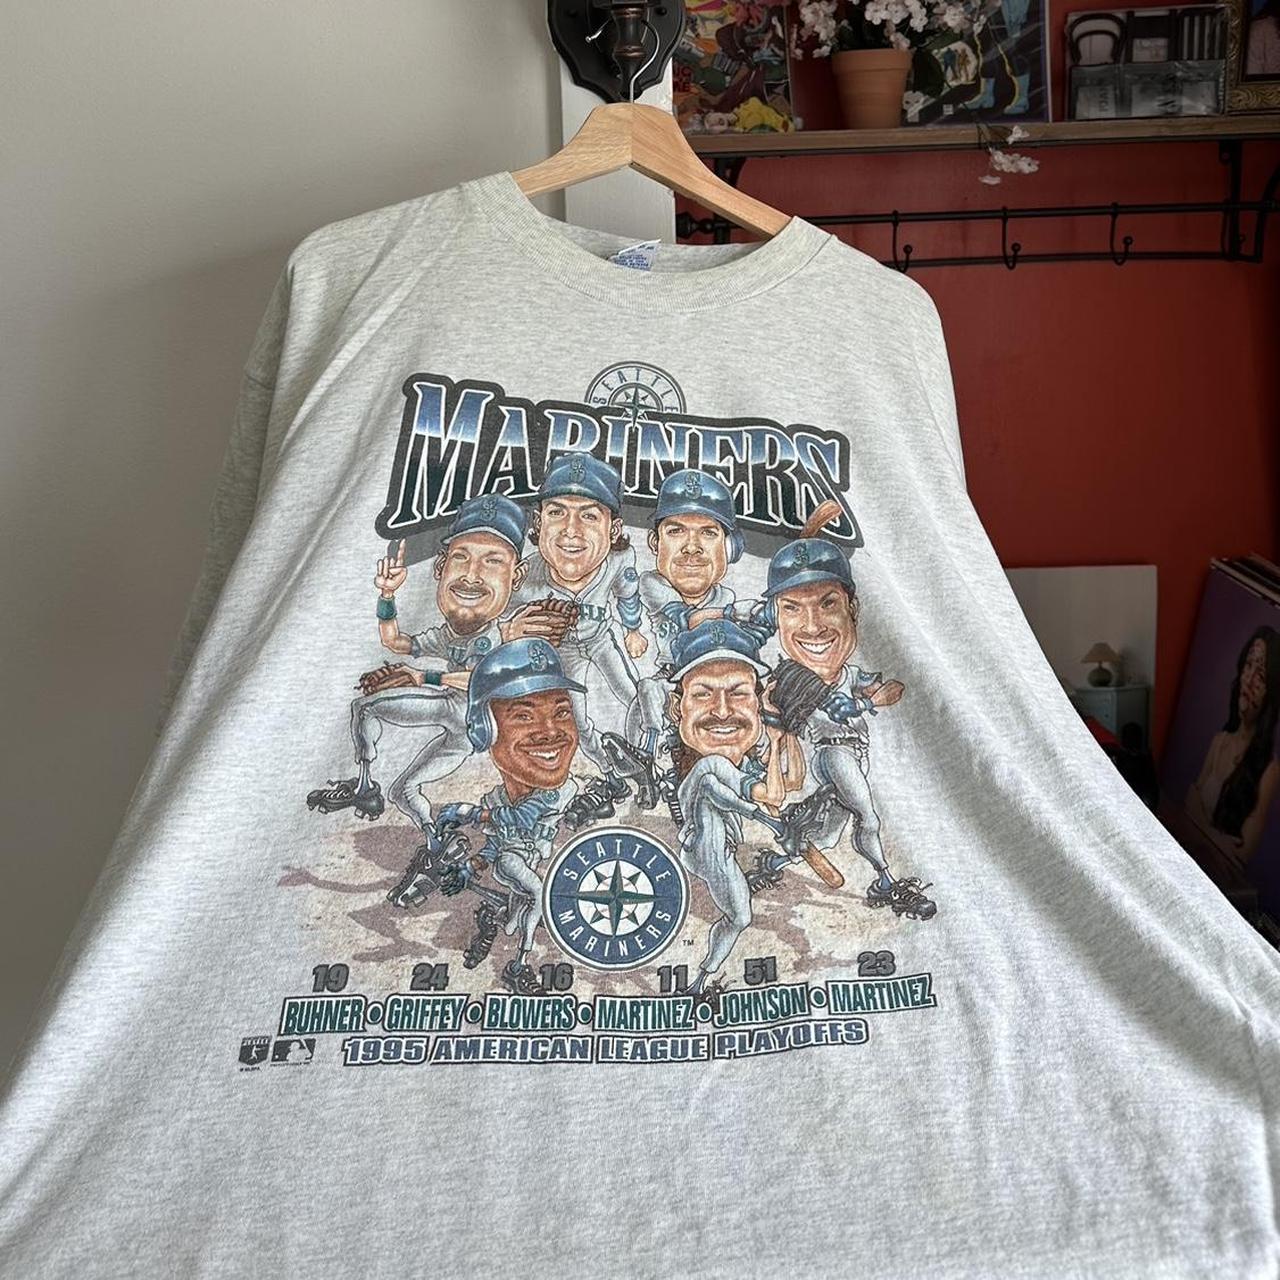 Vintage 1995 Seattle Mariners Shirt. The shirt is in - Depop